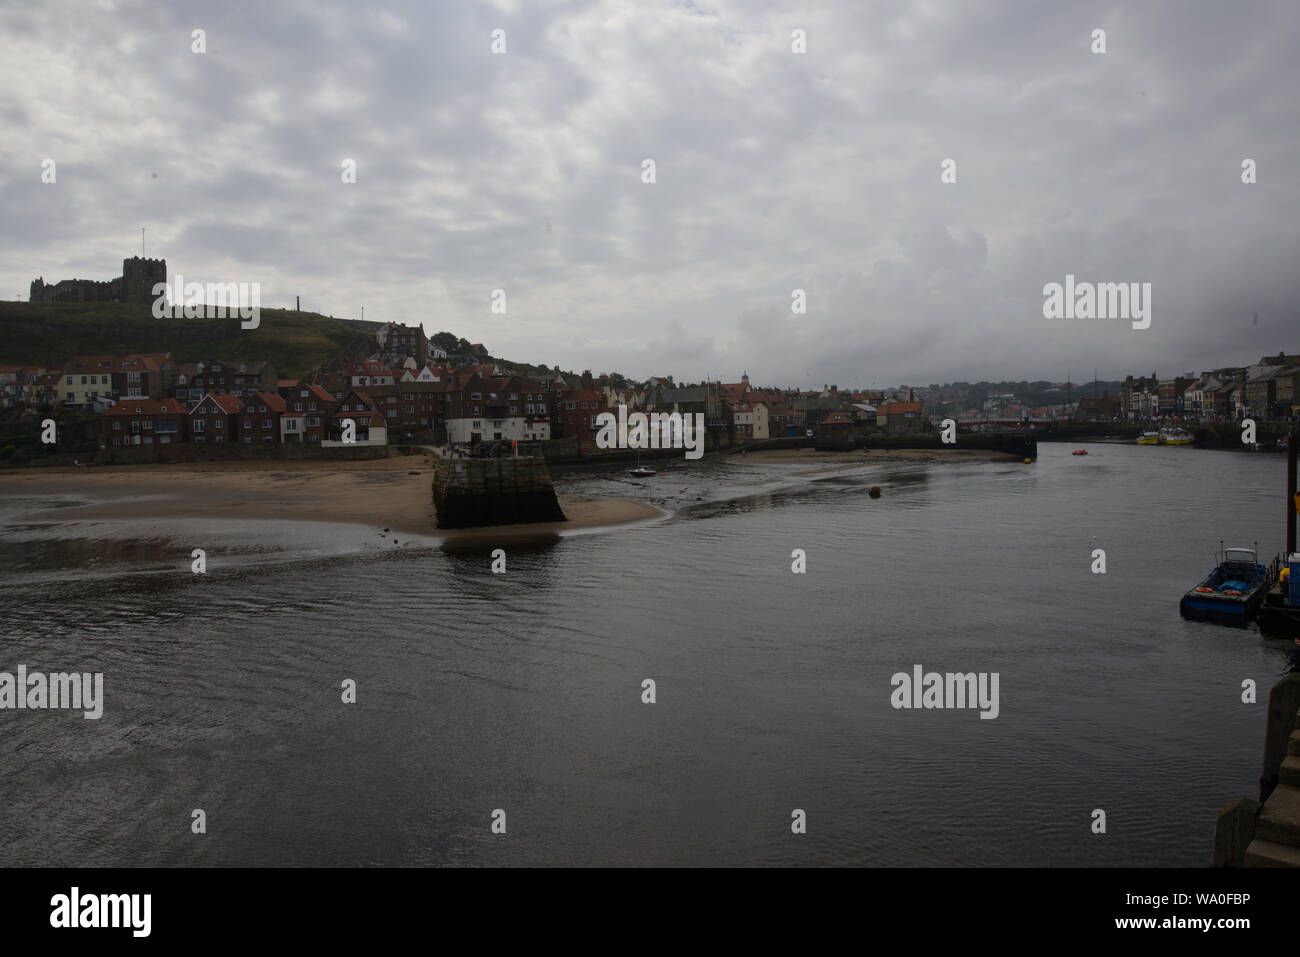 Whitby and it's harbour views. Stock Photo